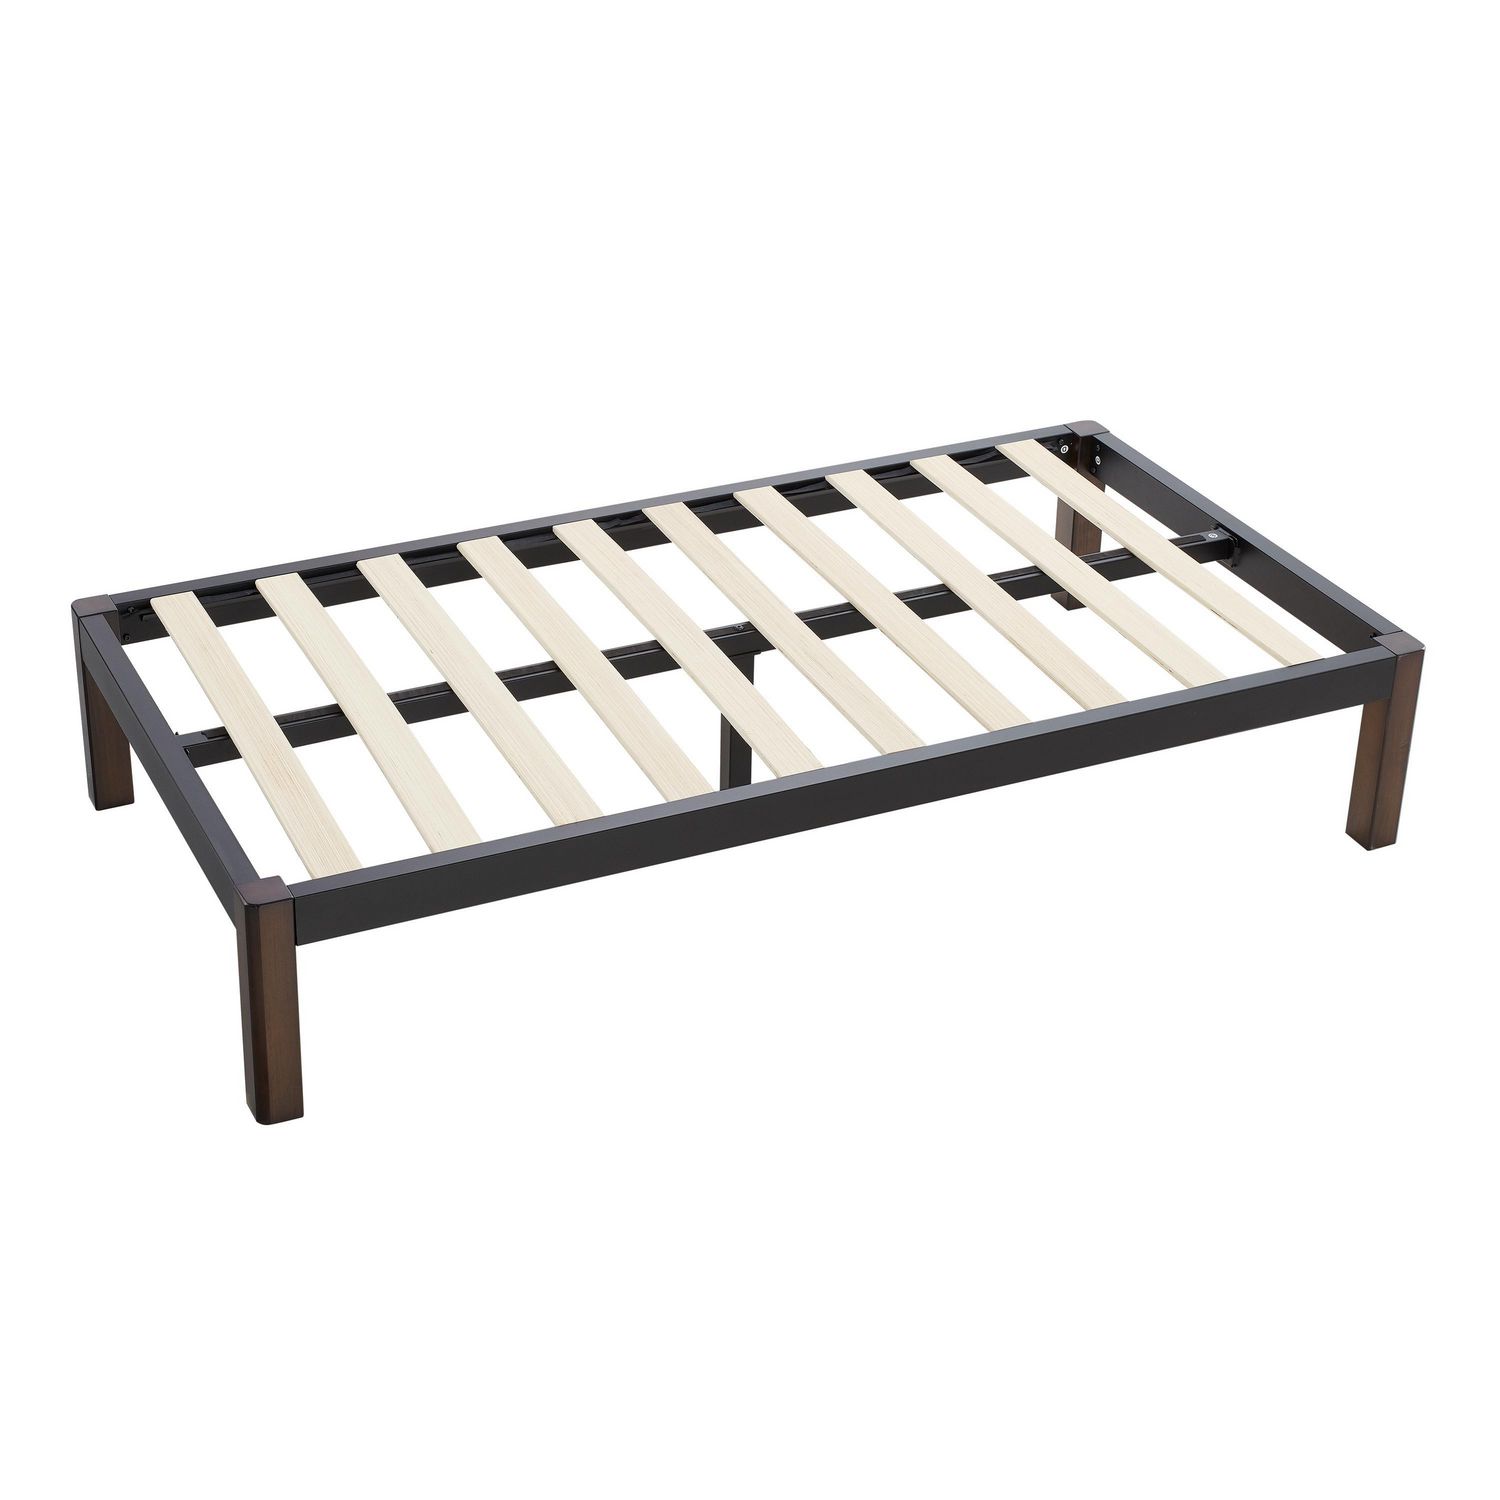 Mainstays Metal Bed Frame With Wood, Wood Legs For Bed Frame